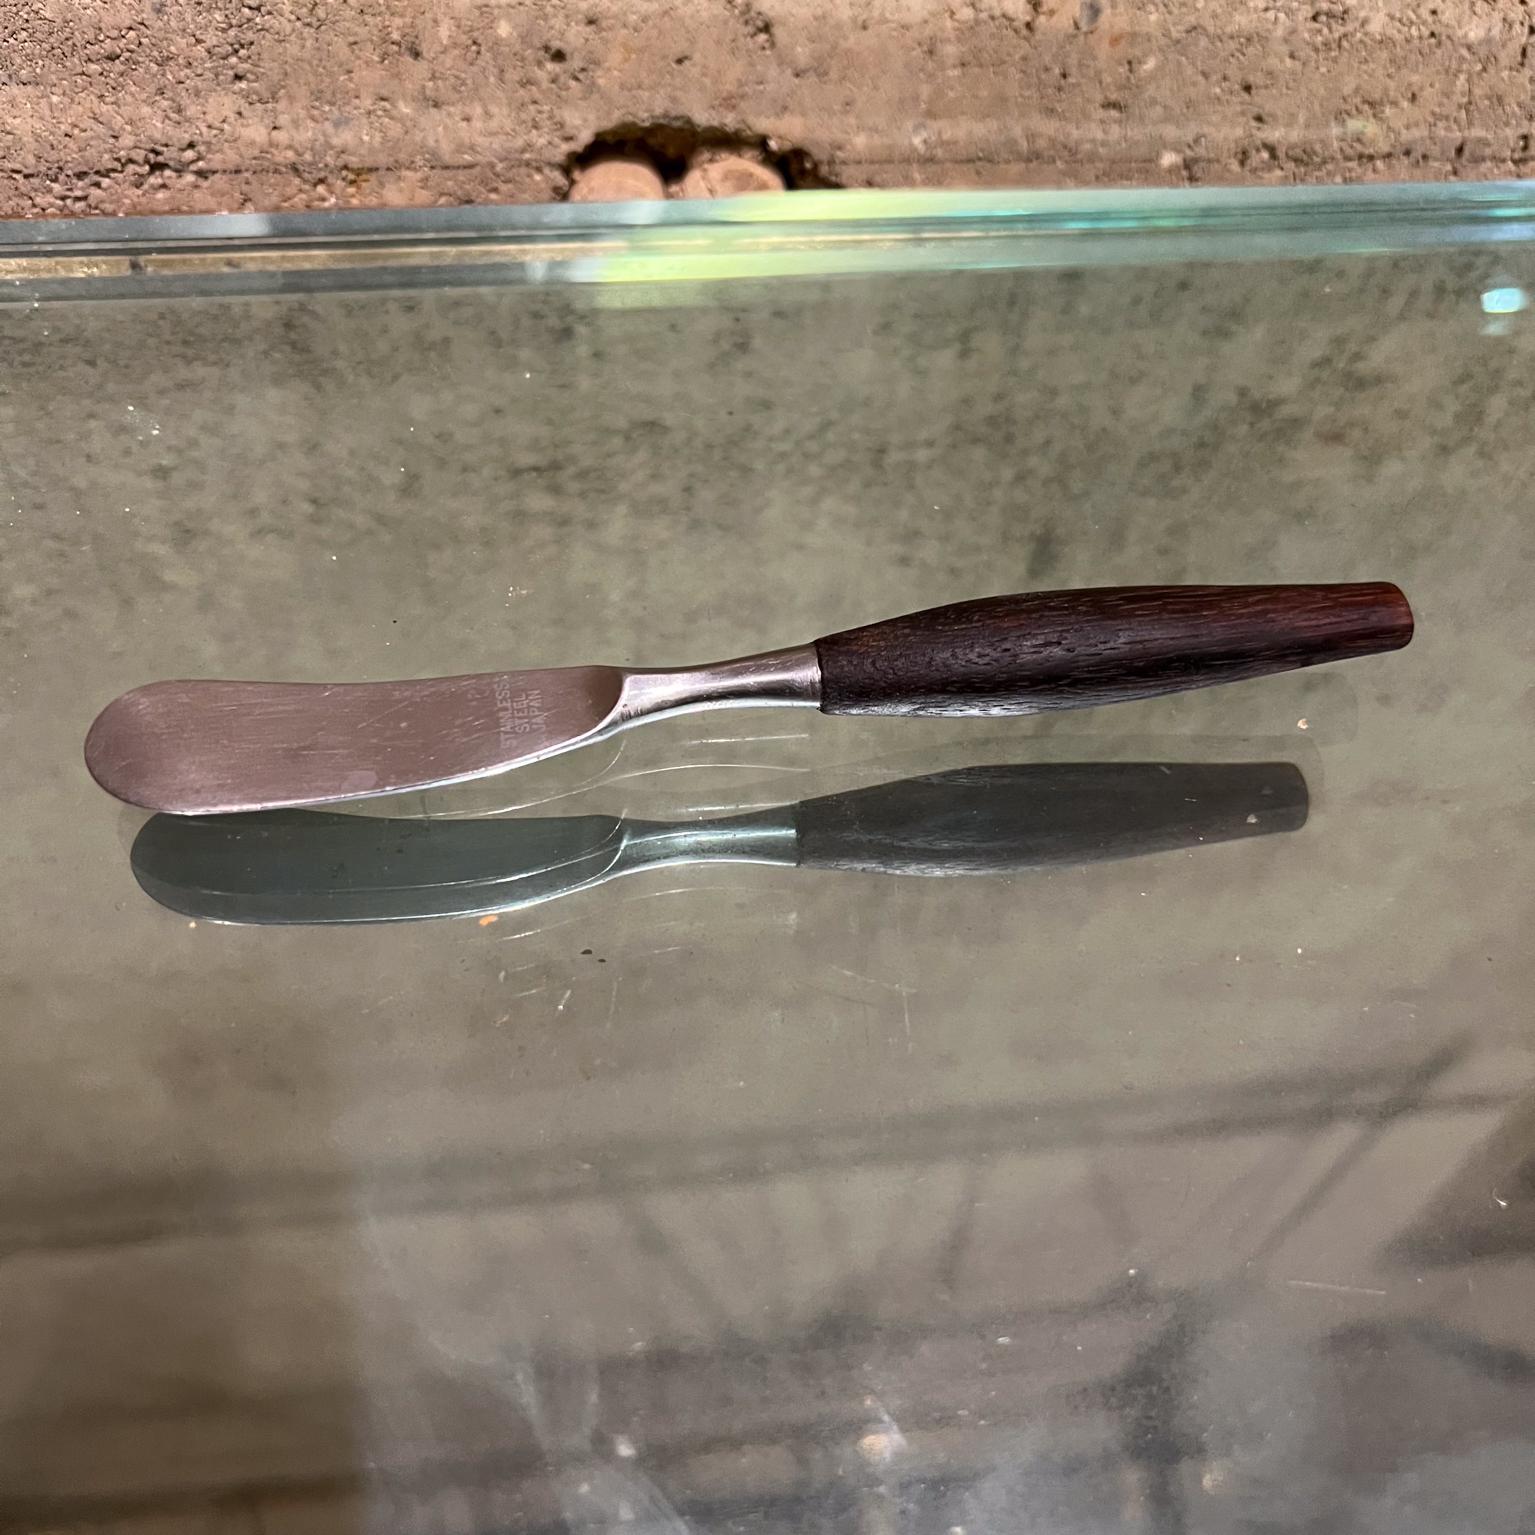 
Vintage Japanese Butter Knife
Stainless steel and wood
6.25 x 75 x .5
Preowned unrestored vintage
Refer to all images.